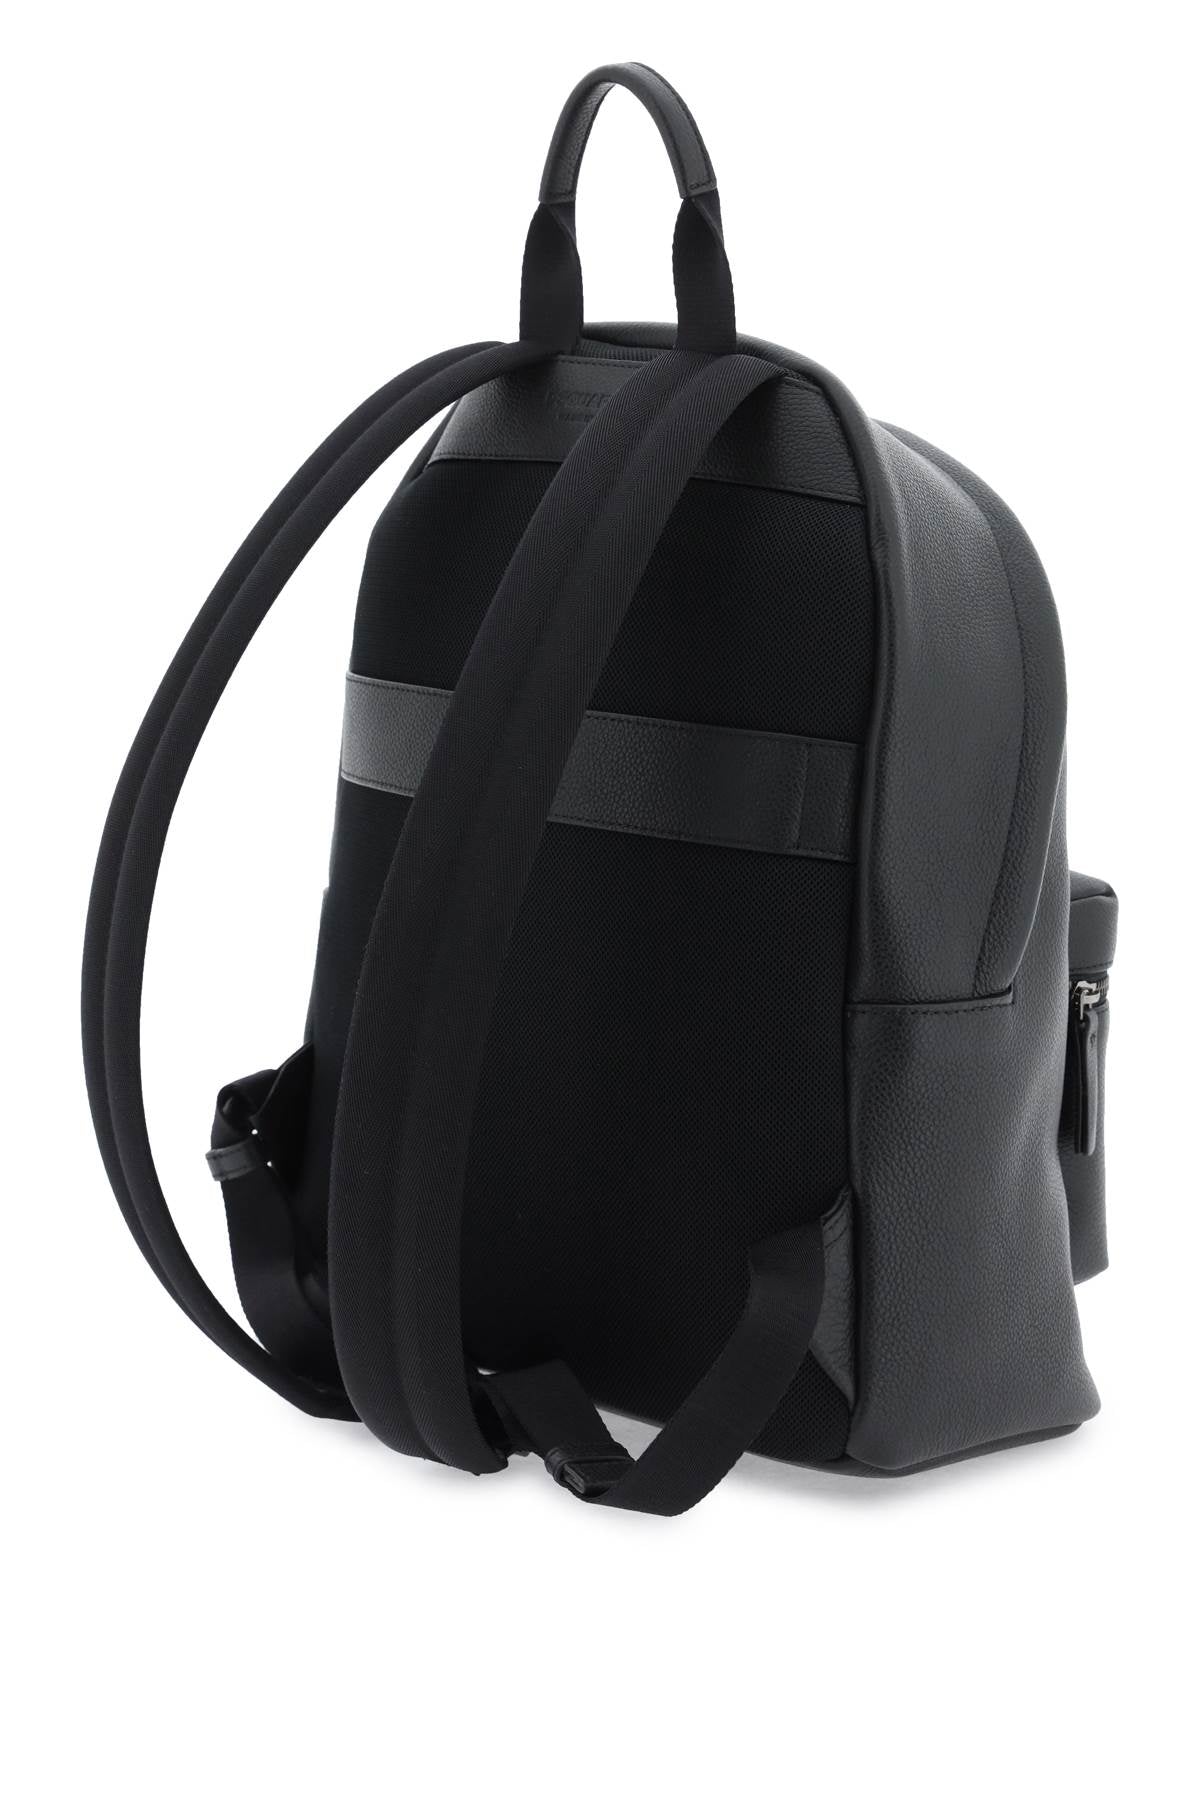 DSQUARED2 Grained Leather Men's Backpack with Contrasting Logo Print